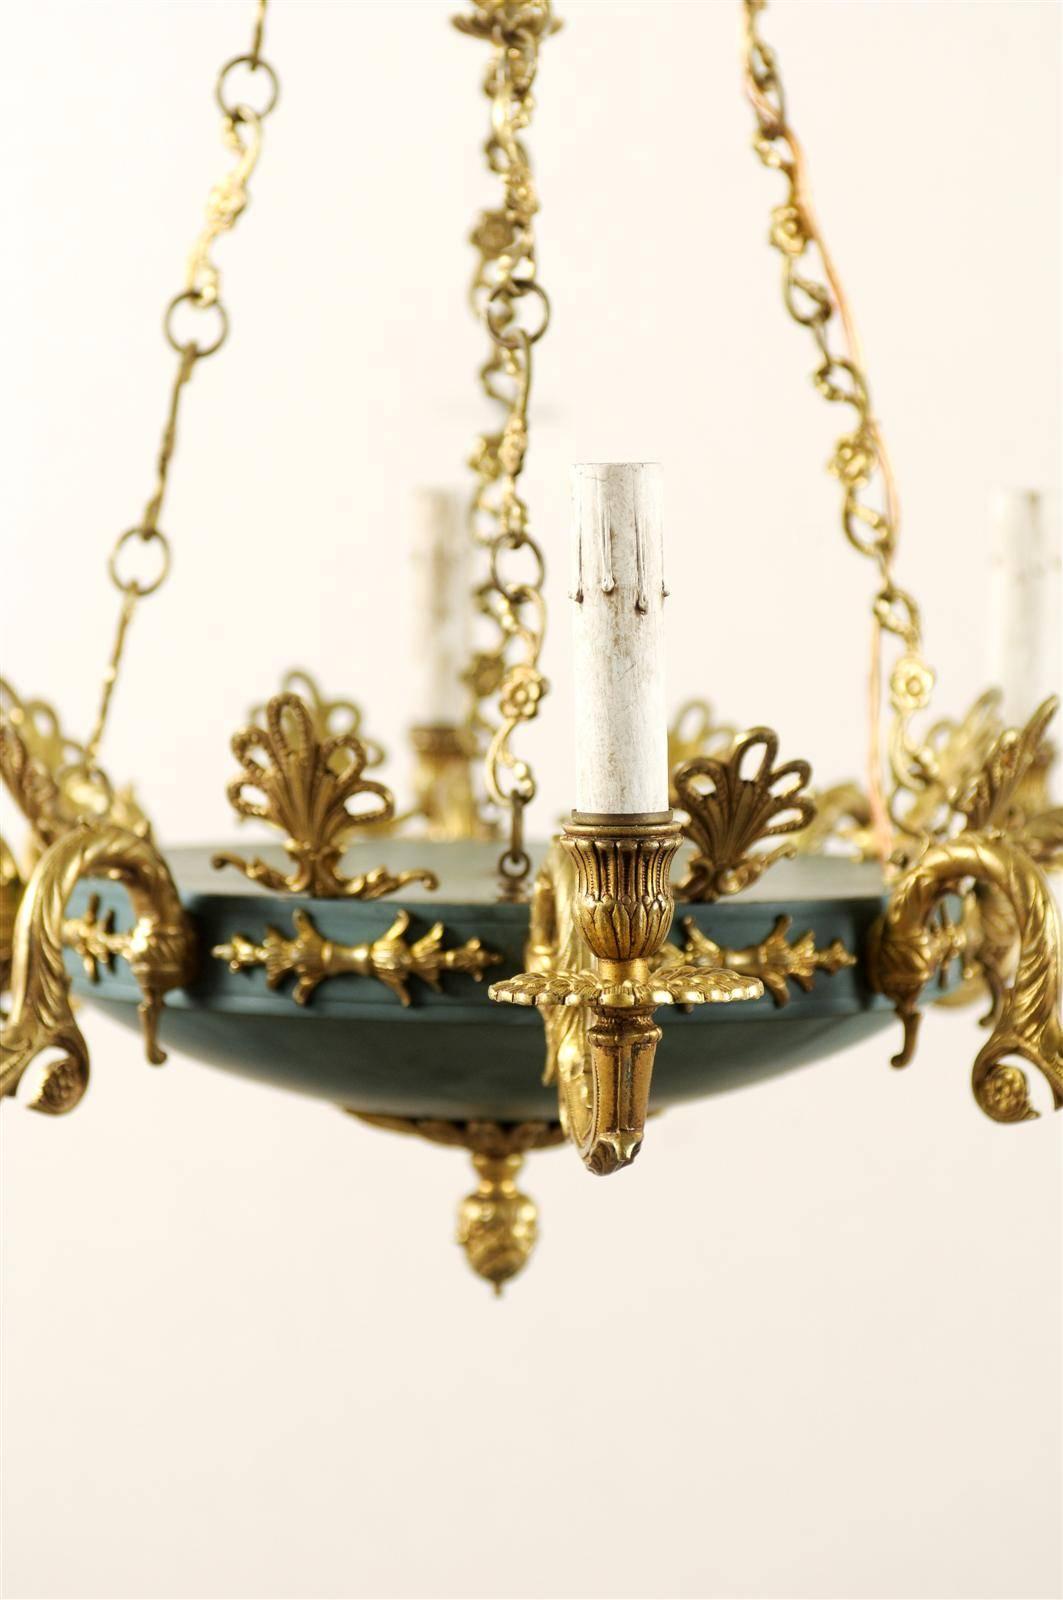 Painted Swedish Empire Style Eight-Light Chandelier of Brass and Iron with Teal Accents